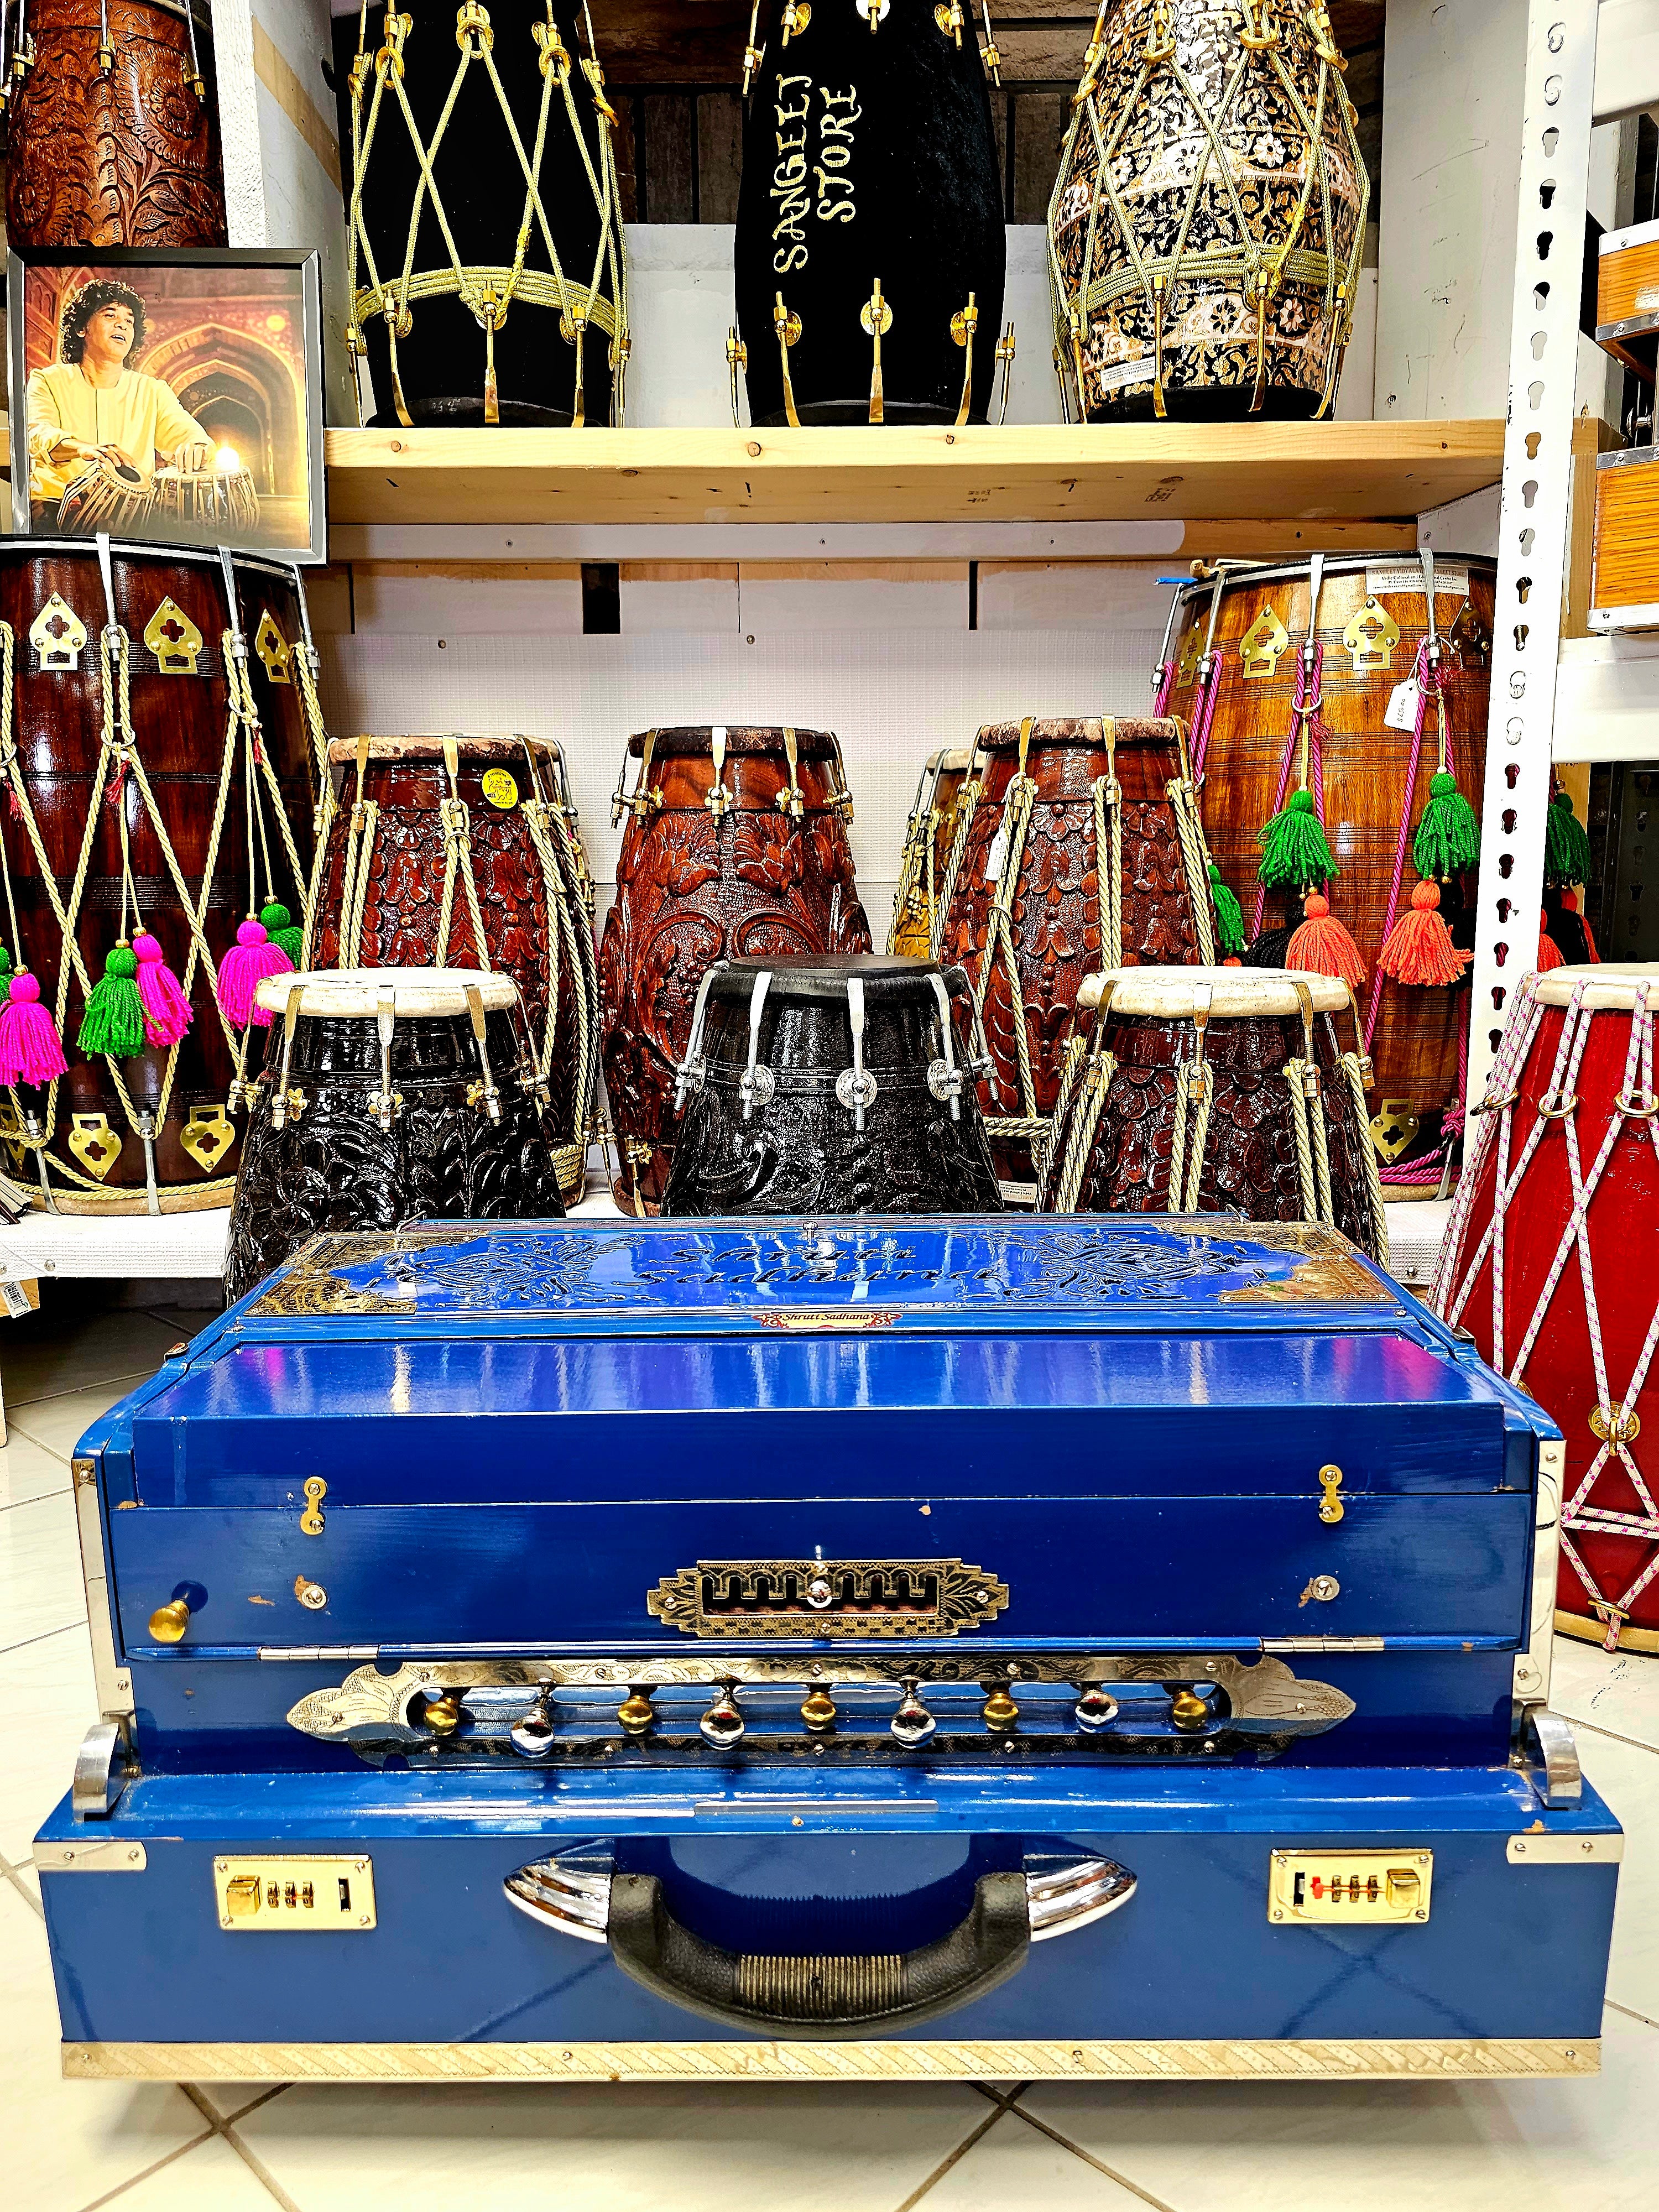 Sonic Odyssey: Refurbished Blue German 9 Scale Changer Harmonium with 3 Reeds(2-line German and 1-line Indian Bass)